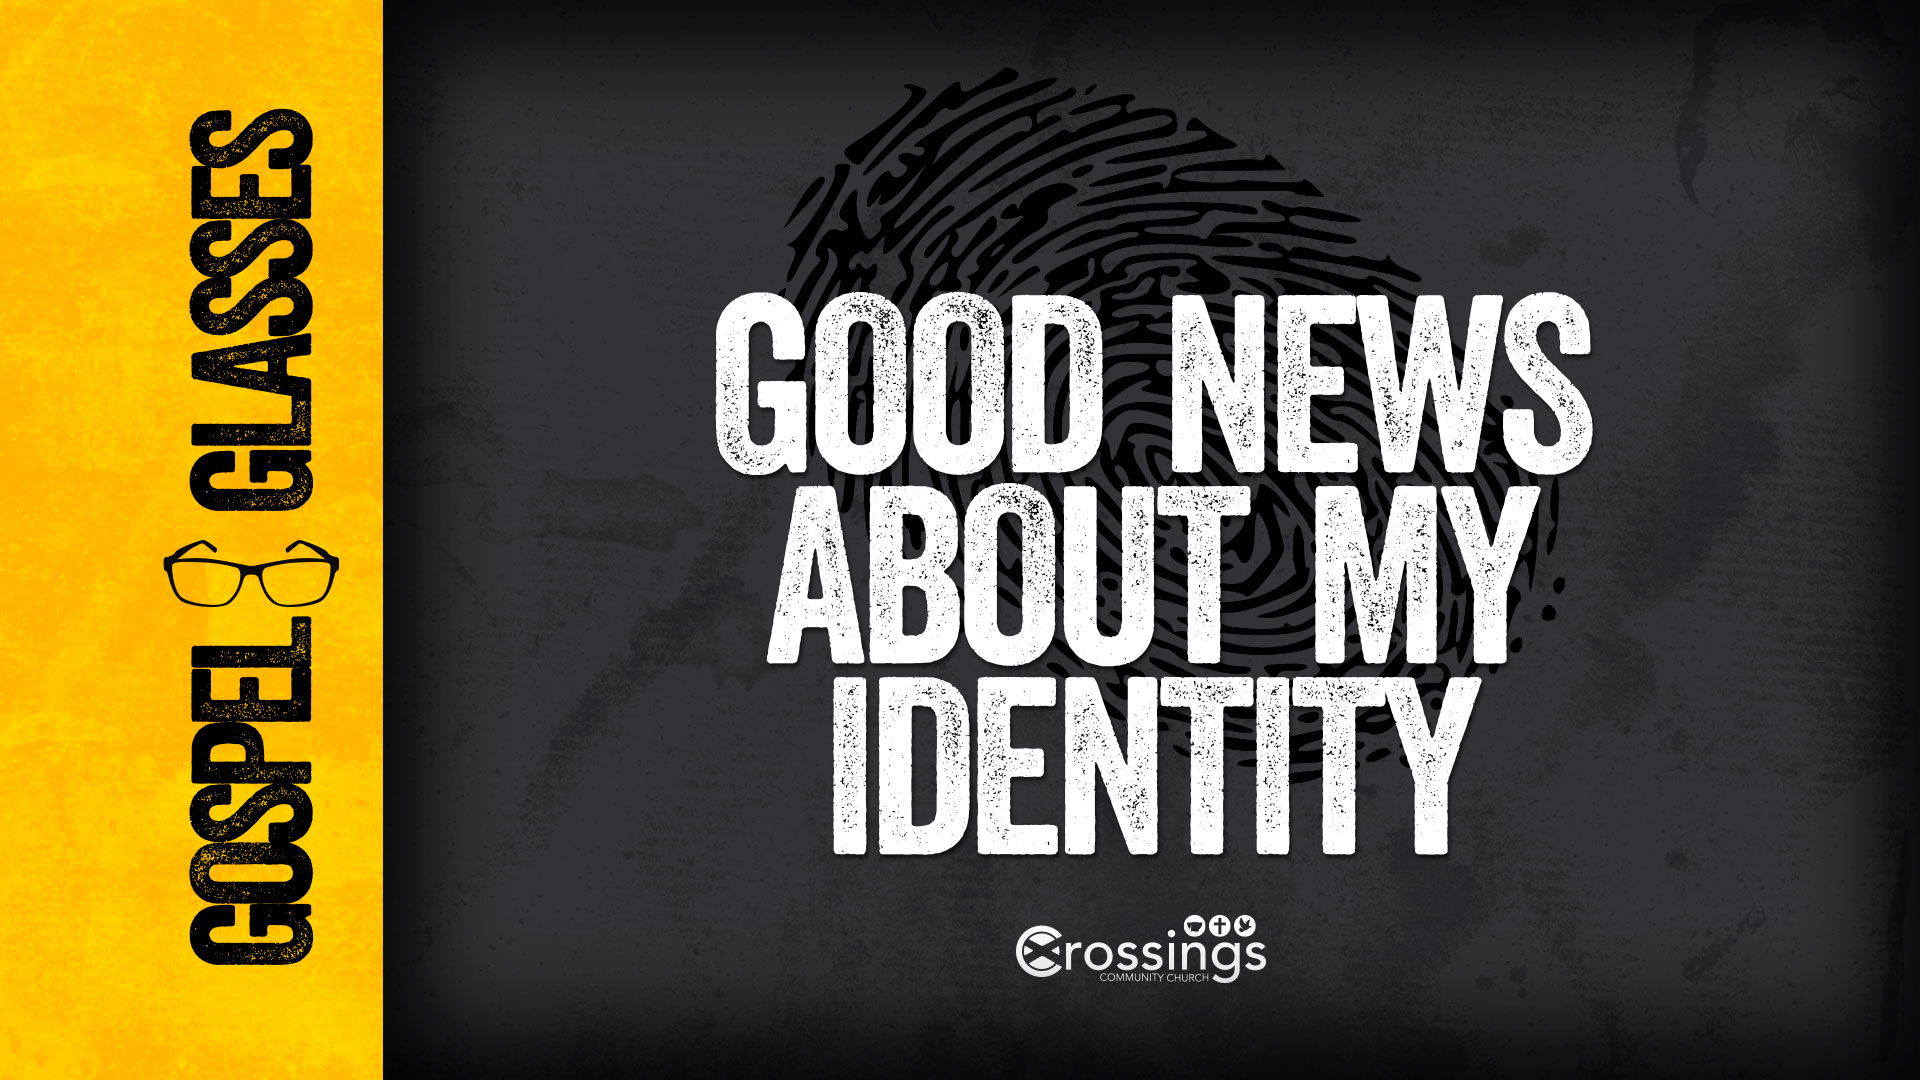 Jesus Changes Our Identity